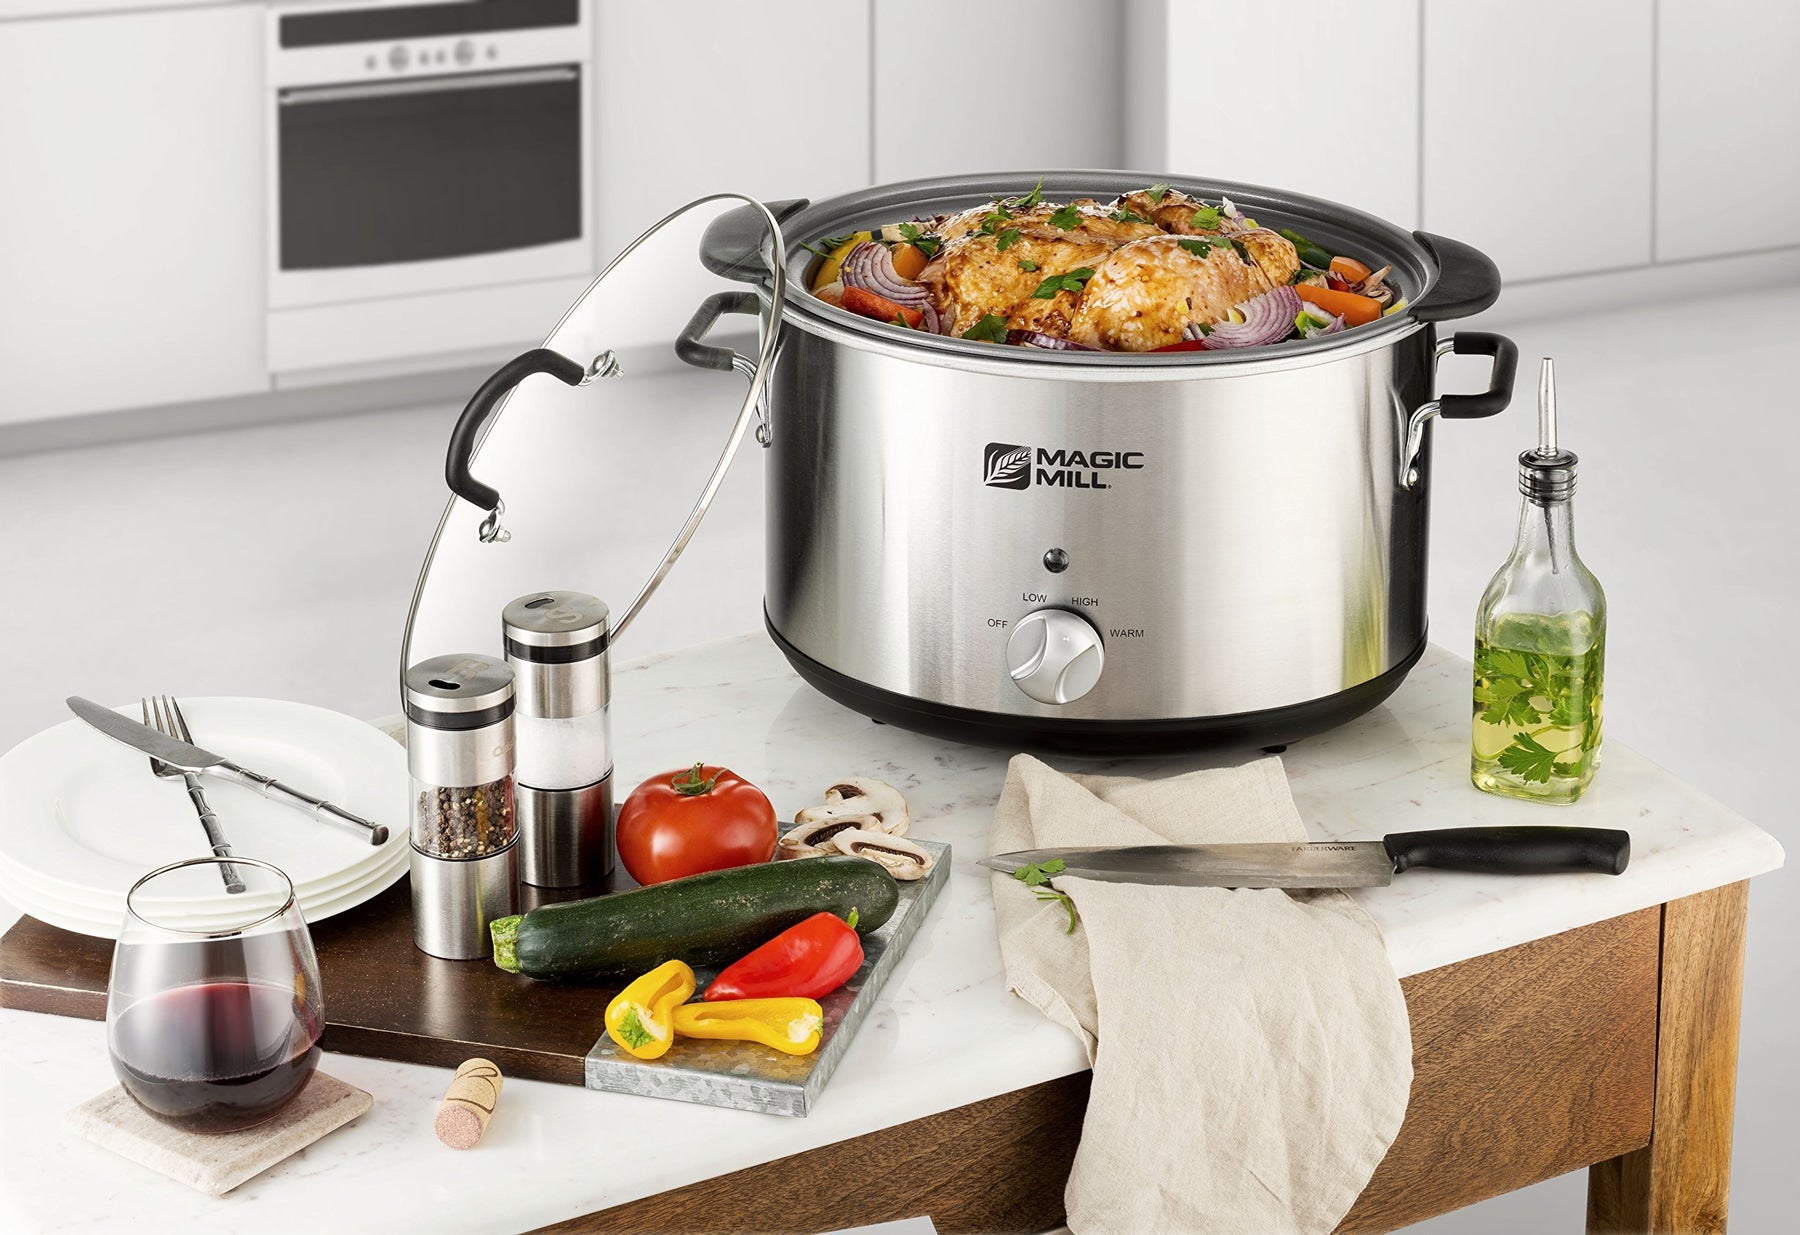 MAGIC MILL 12 QT black SLOW COOKER WITH FLAT GLASS COVER AND COOL TOUCH  HANDLES MODEL# MSC1225